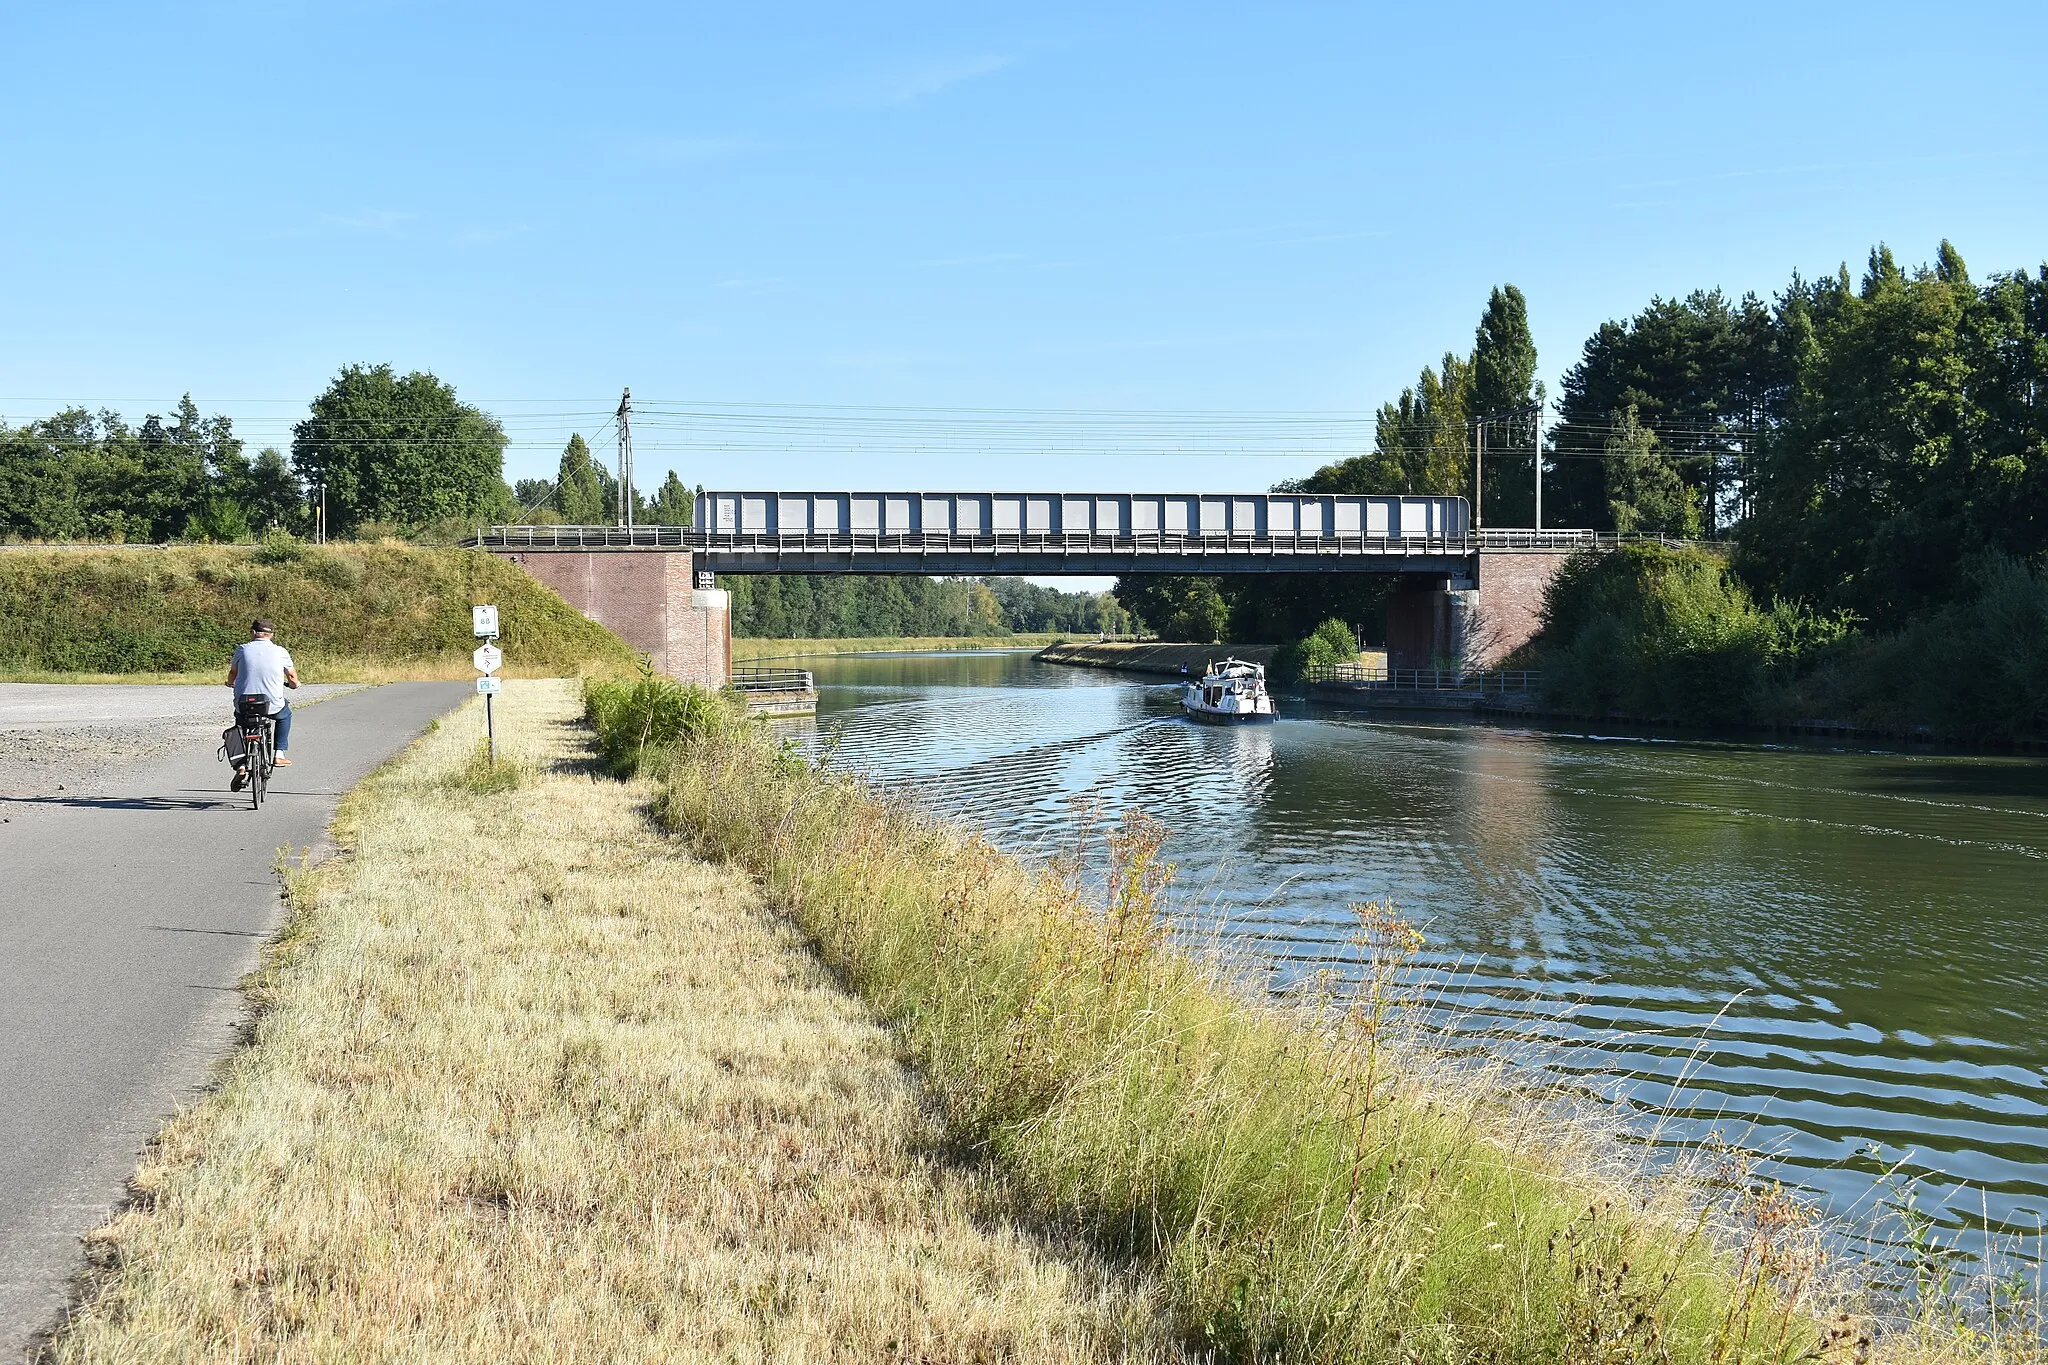 Photo showing: Steel railway bridge over the Netekanaal. Narrow cycle path at the rear of the bridge (not visible).